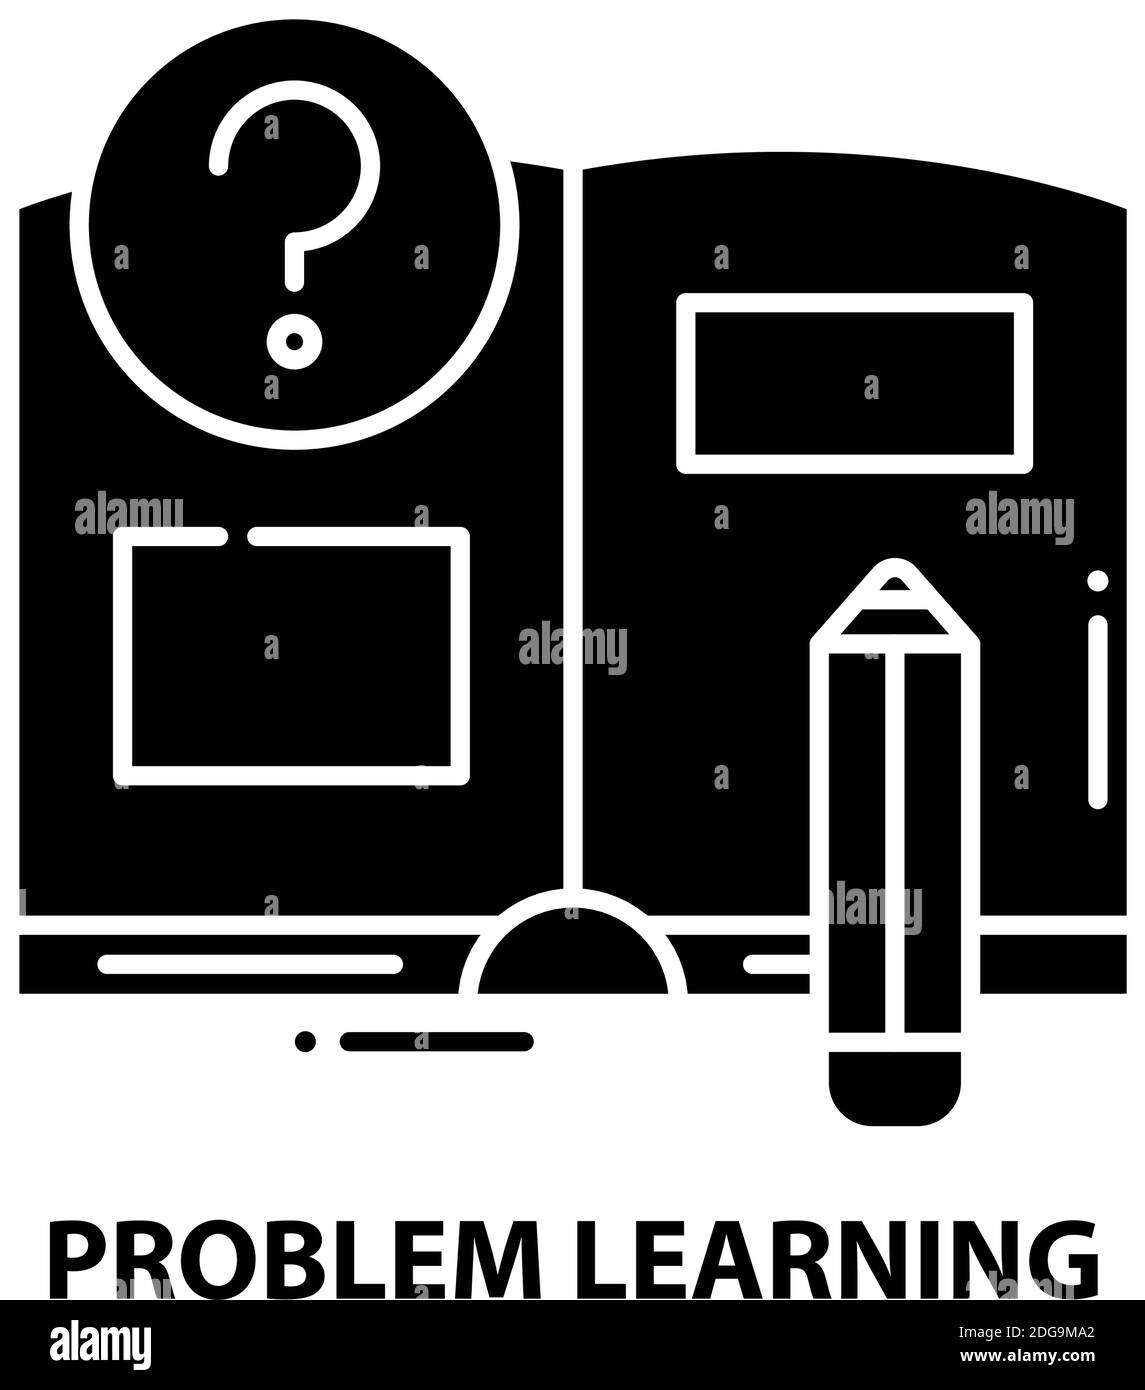 problem learning icon, black vector sign with editable strokes, concept illustration Stock Vector